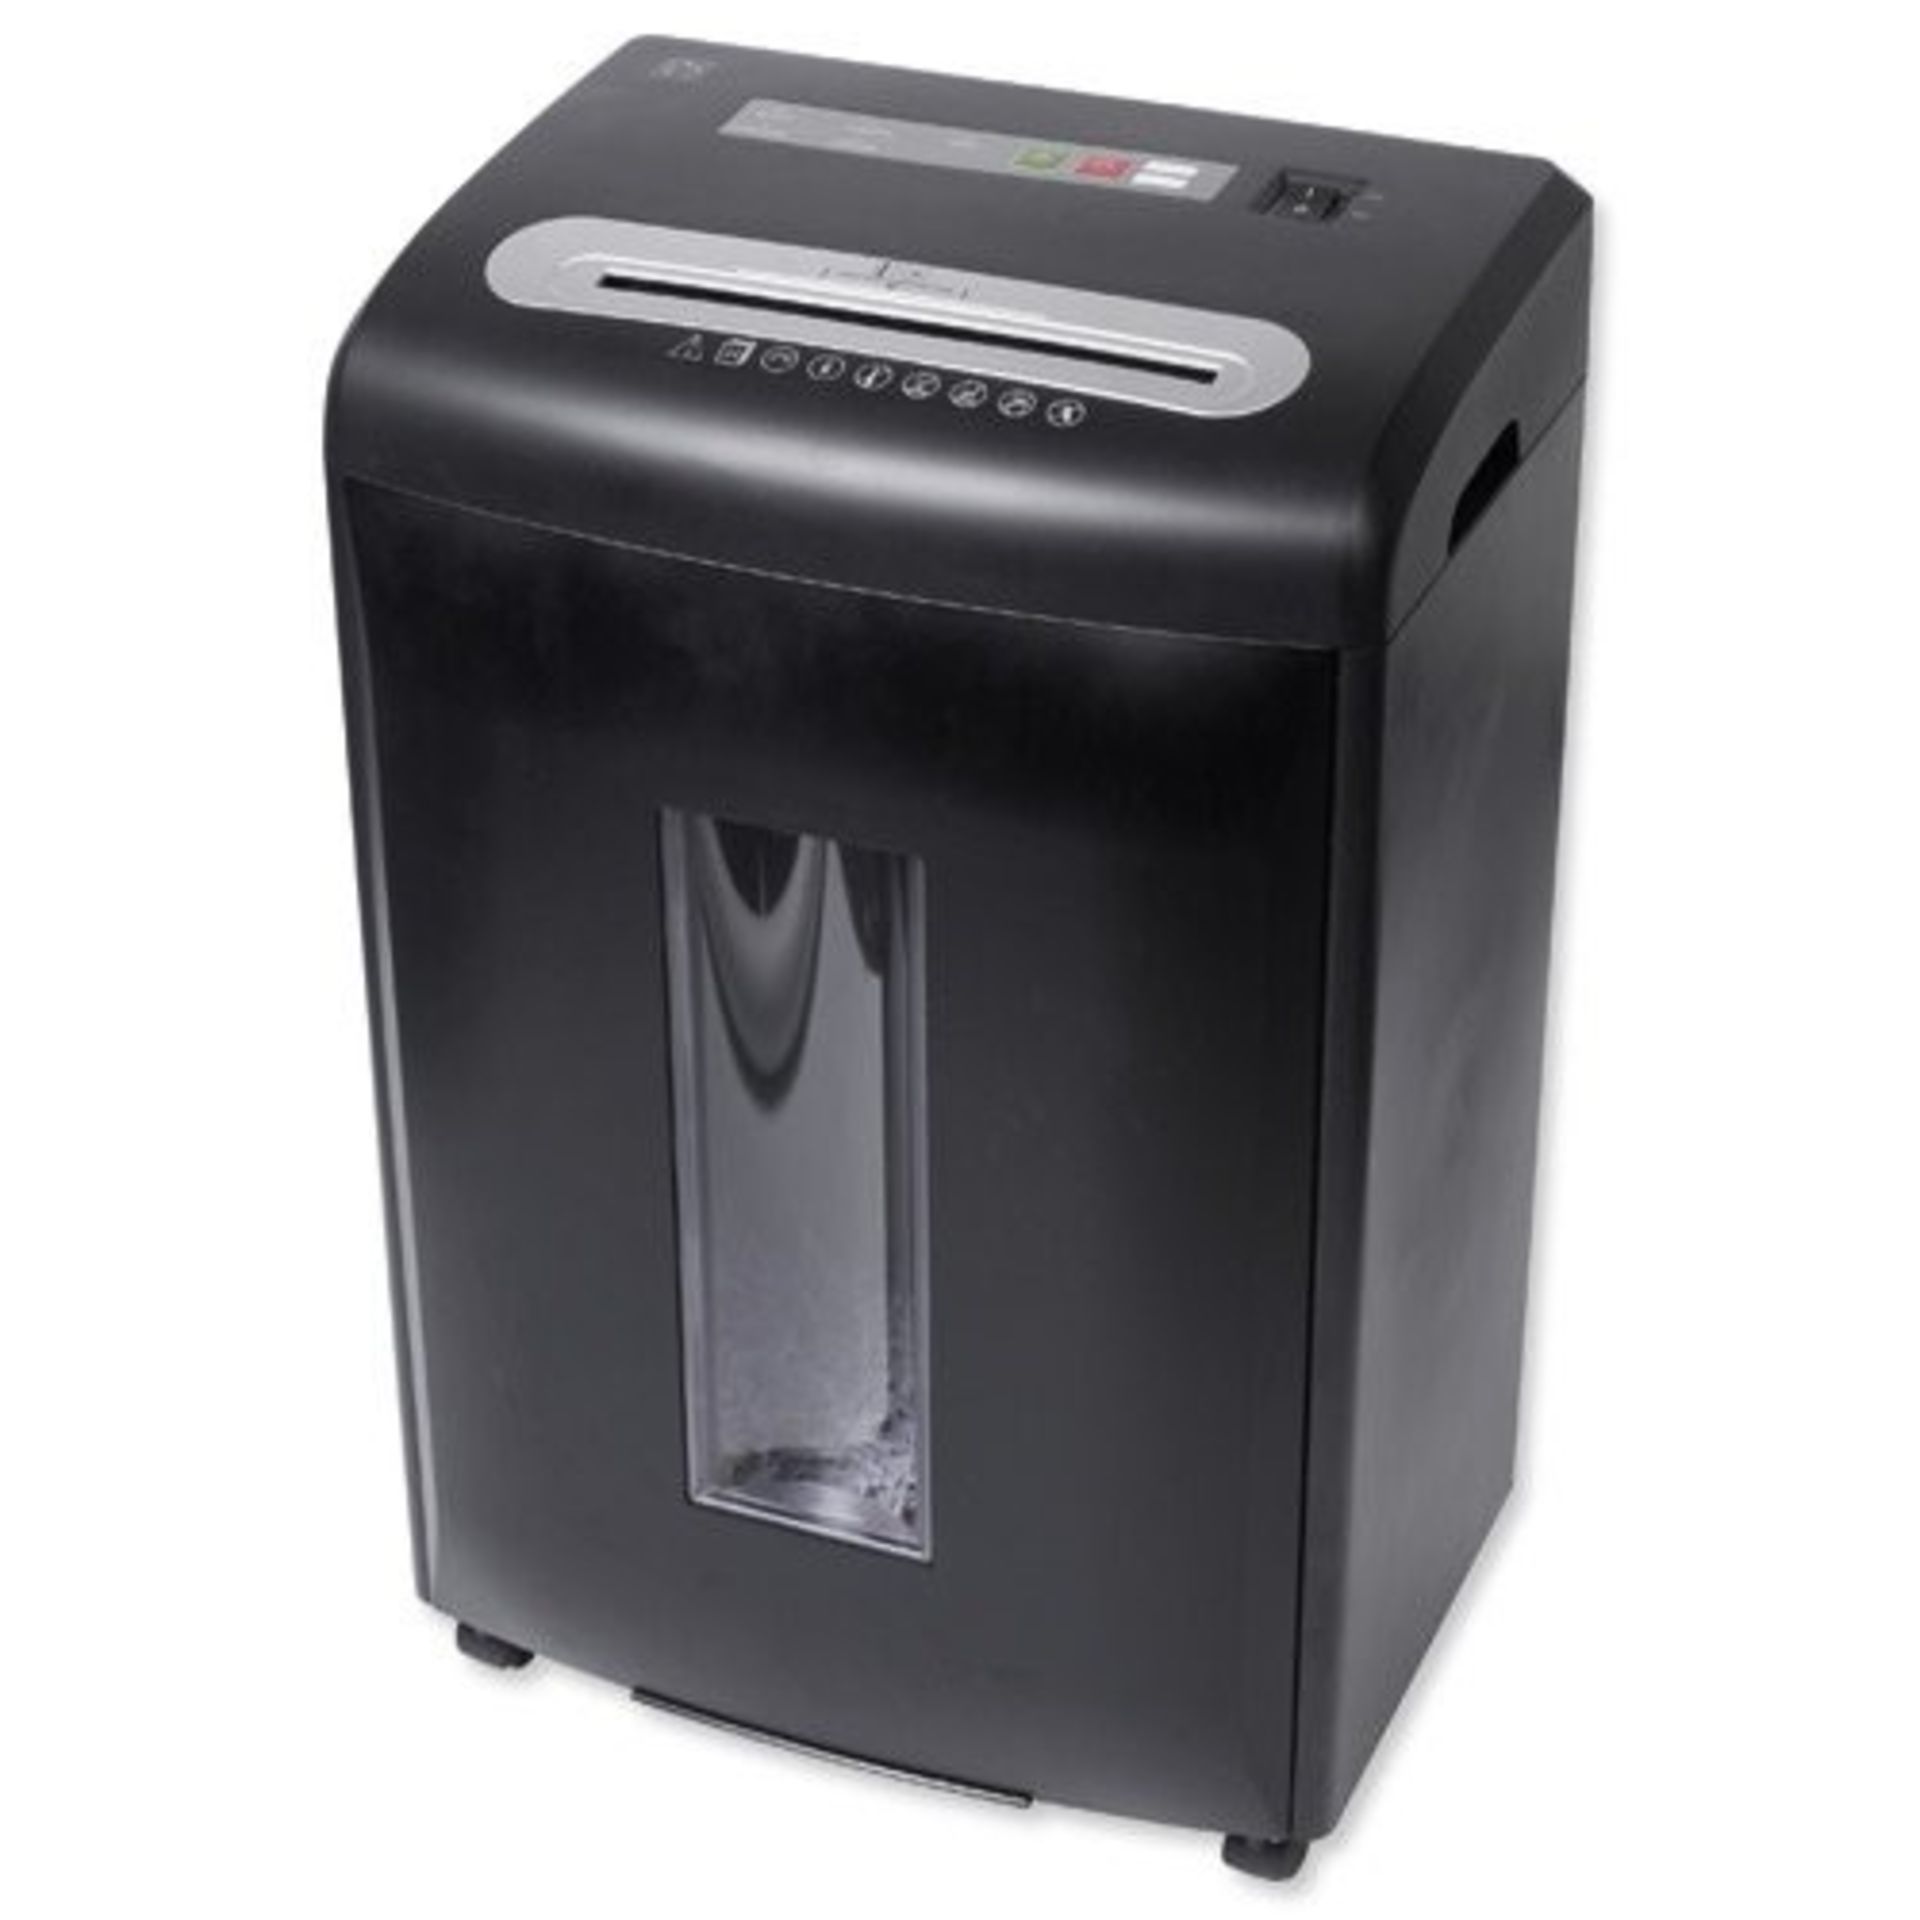 1 x Office Shredder - Model: 5 Star CC24 - Brand New & Boxed - Can Even Shred Credit Cards and